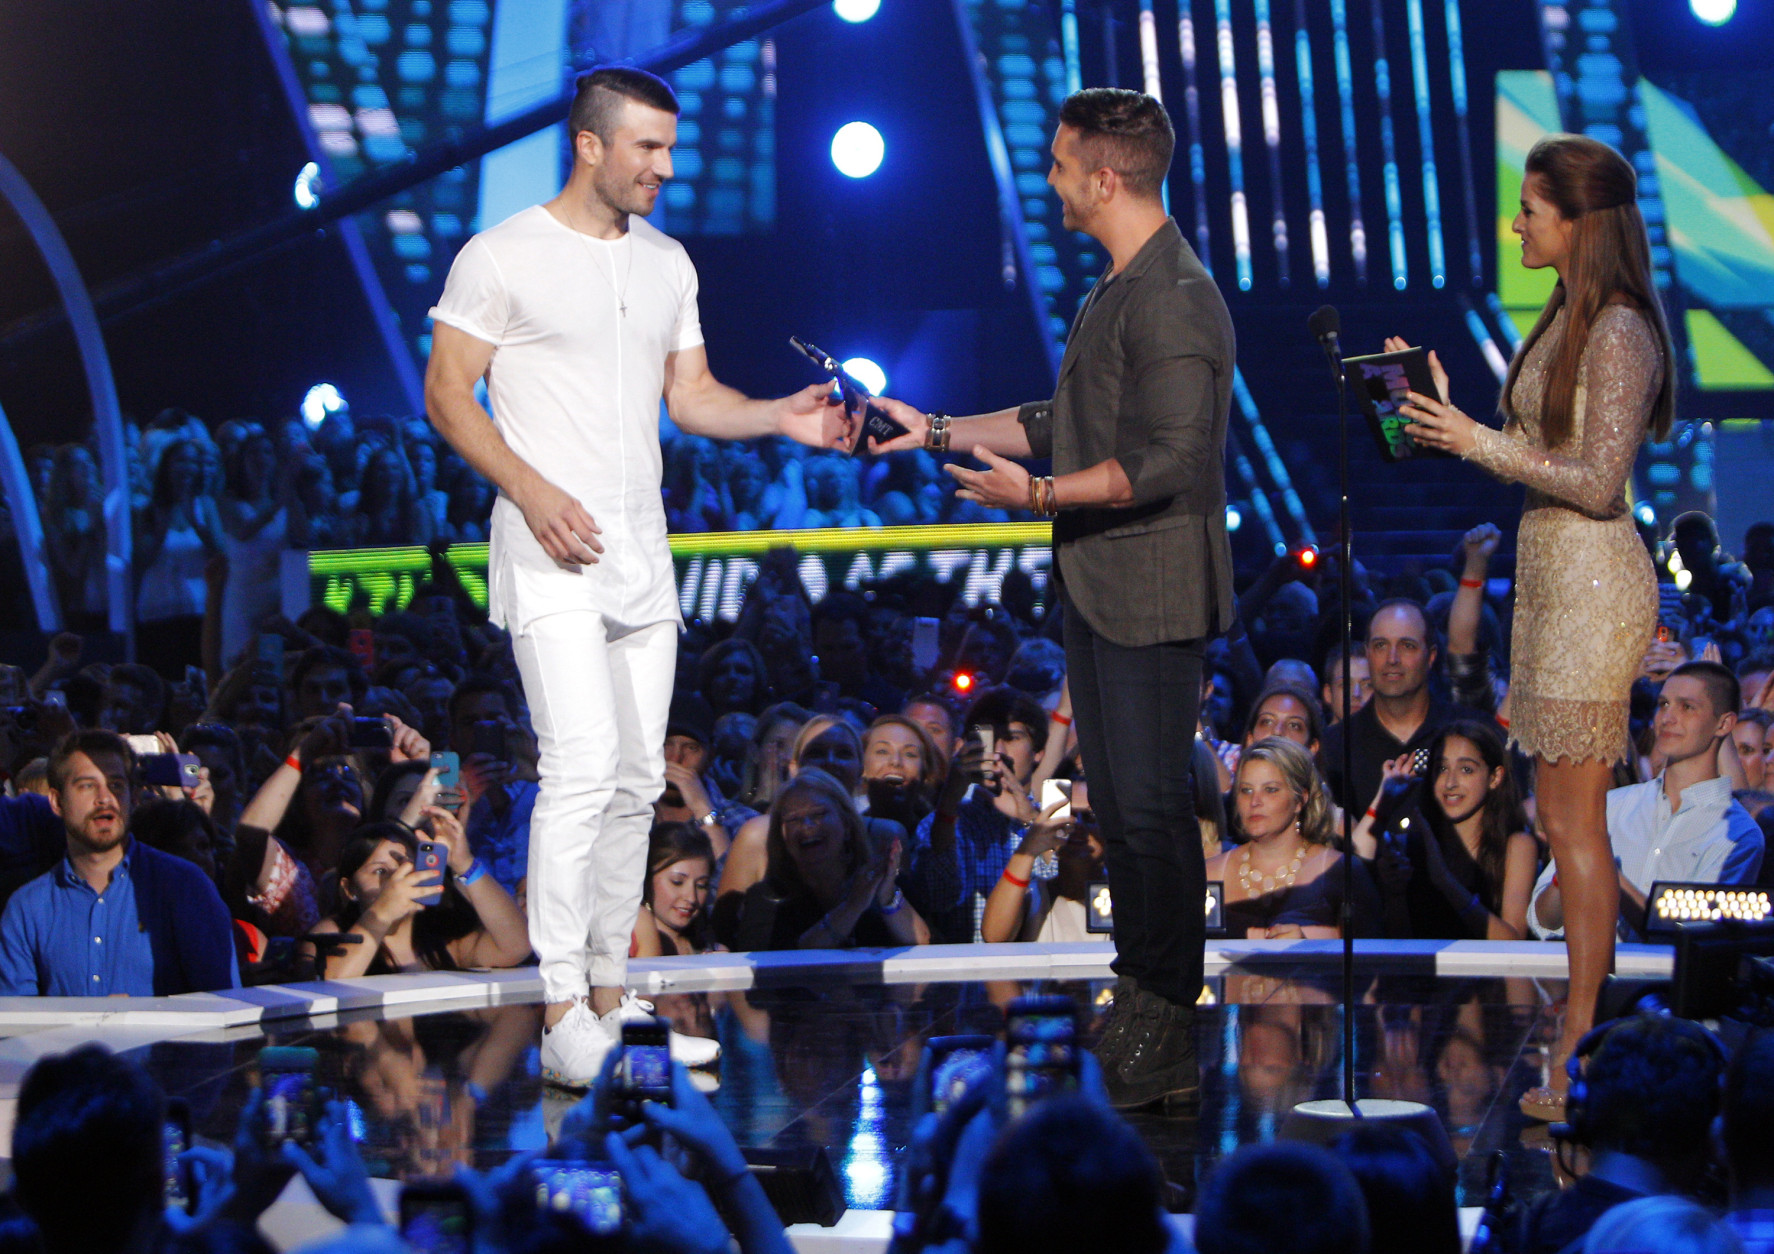 Cassadee Pope, from right, and Nick Fradiani present the award for breakthrough video of the year to Sam Hunt for "Leave the Night On" at the CMT Music Awards at Bridgestone Arena on Wednesday, June 10, 2015, in Nashville, Tenn. (Photo by Wade Payne/Invision/AP)